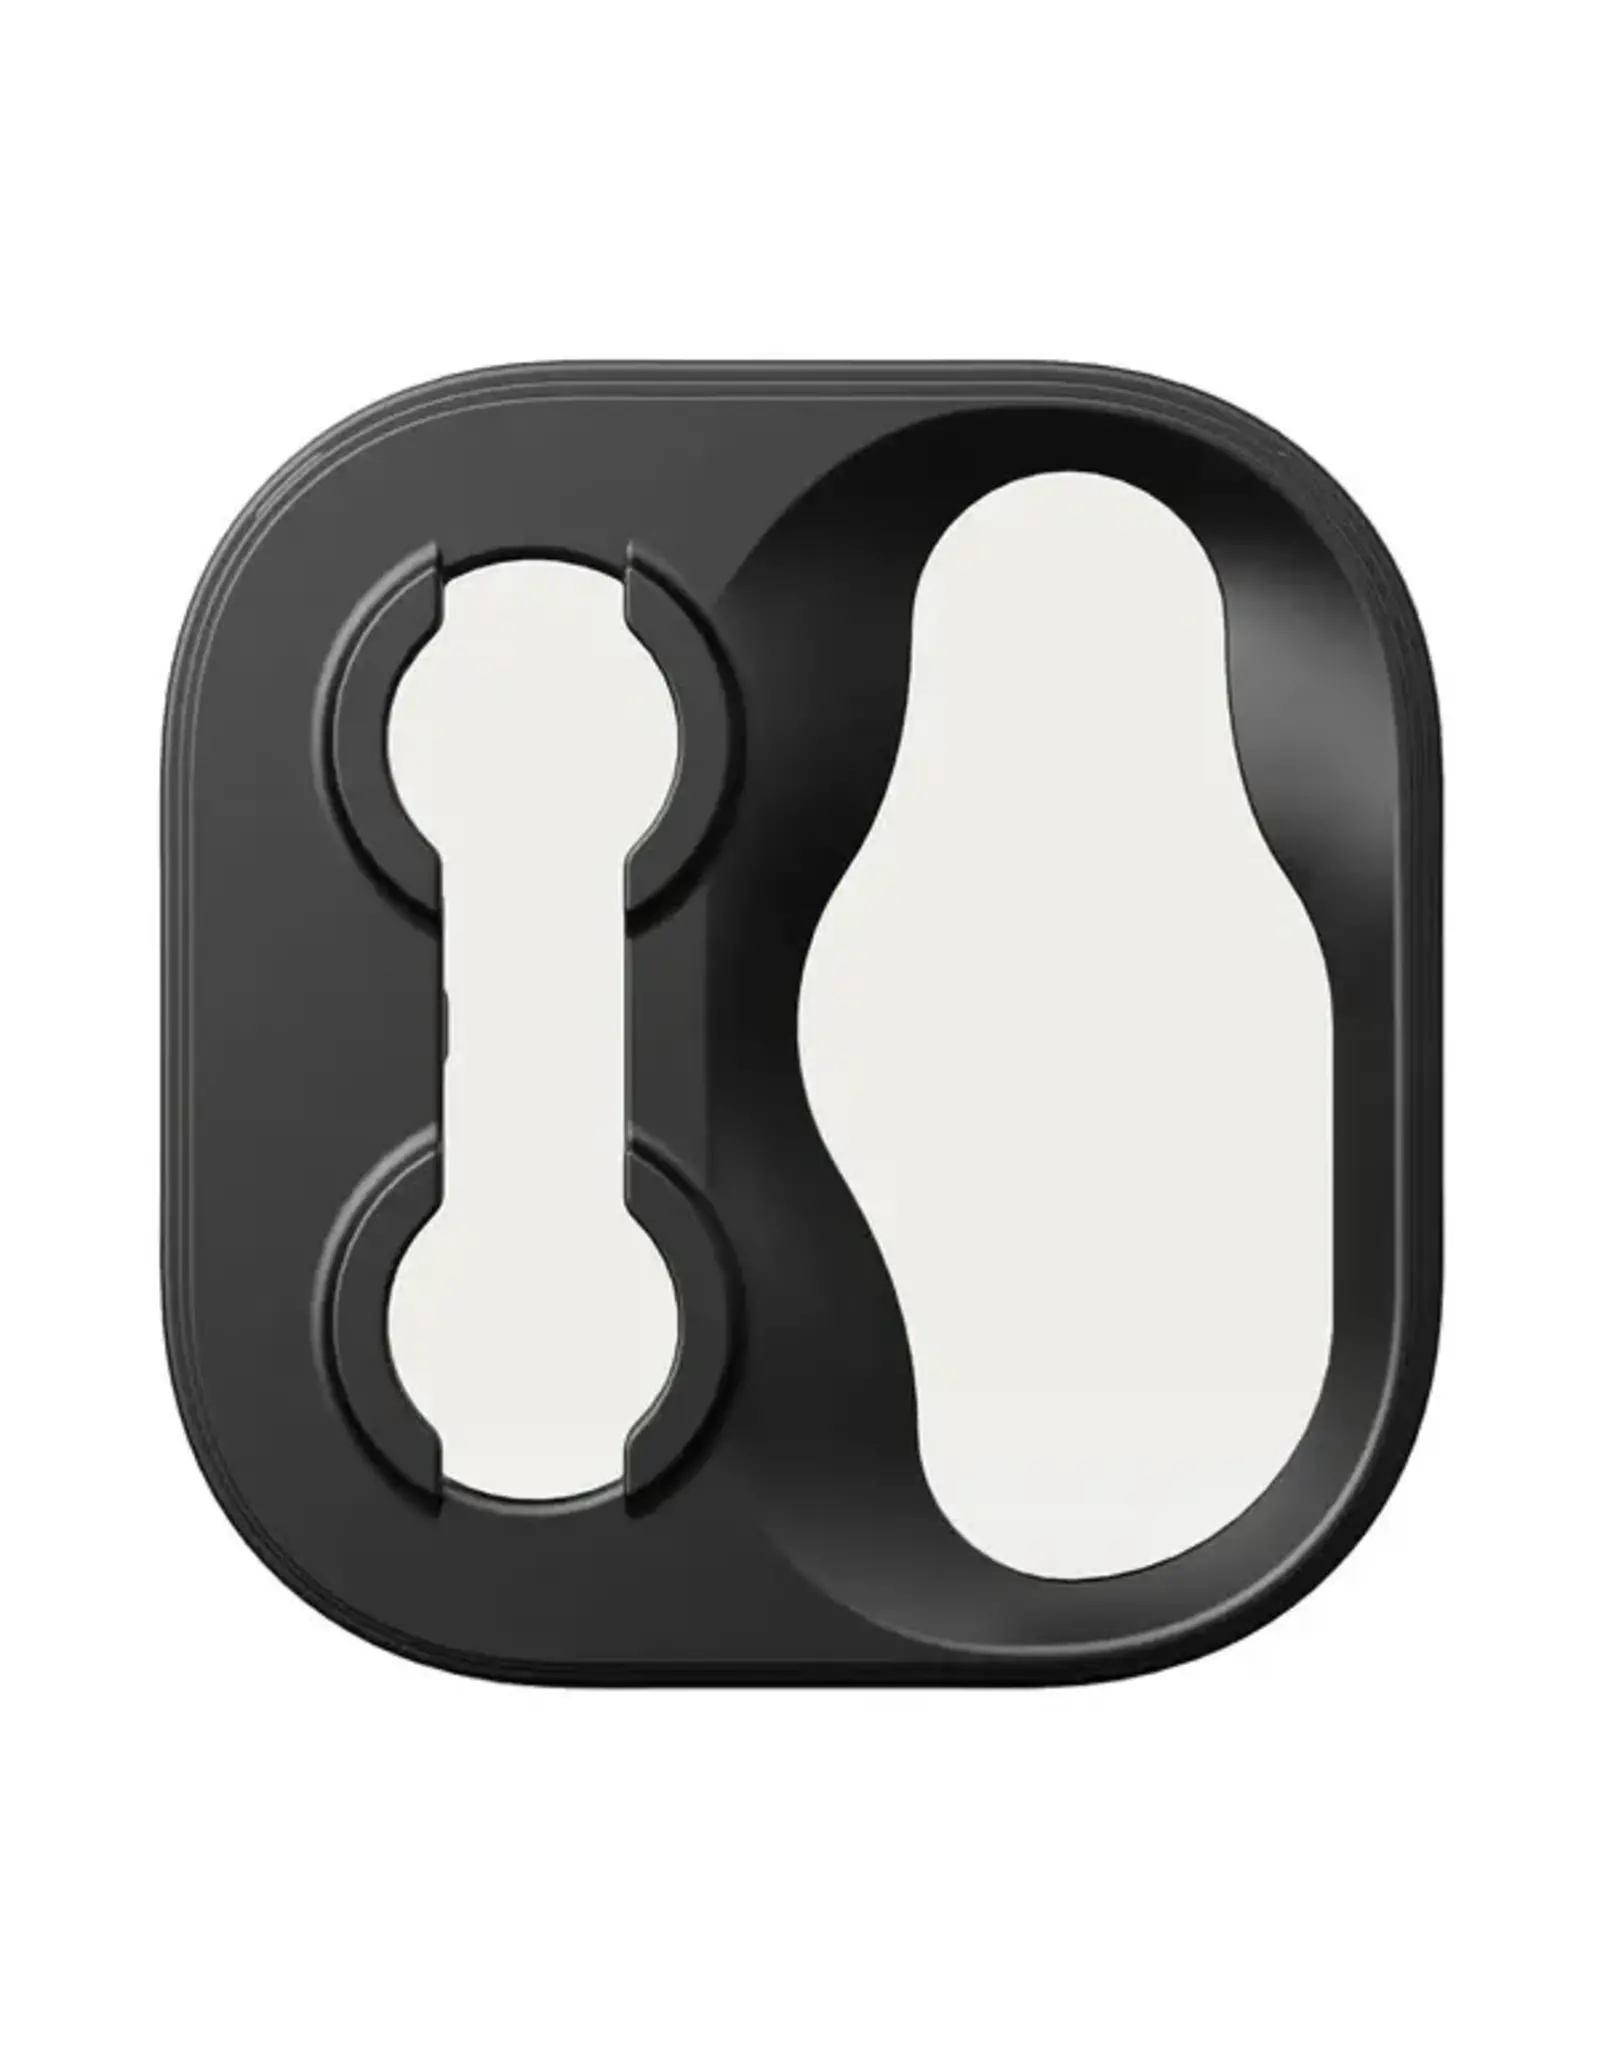 Moment Moment - 3D Printed Drop-in Lens Mount - for iPhone 14 Pro / Pro Max